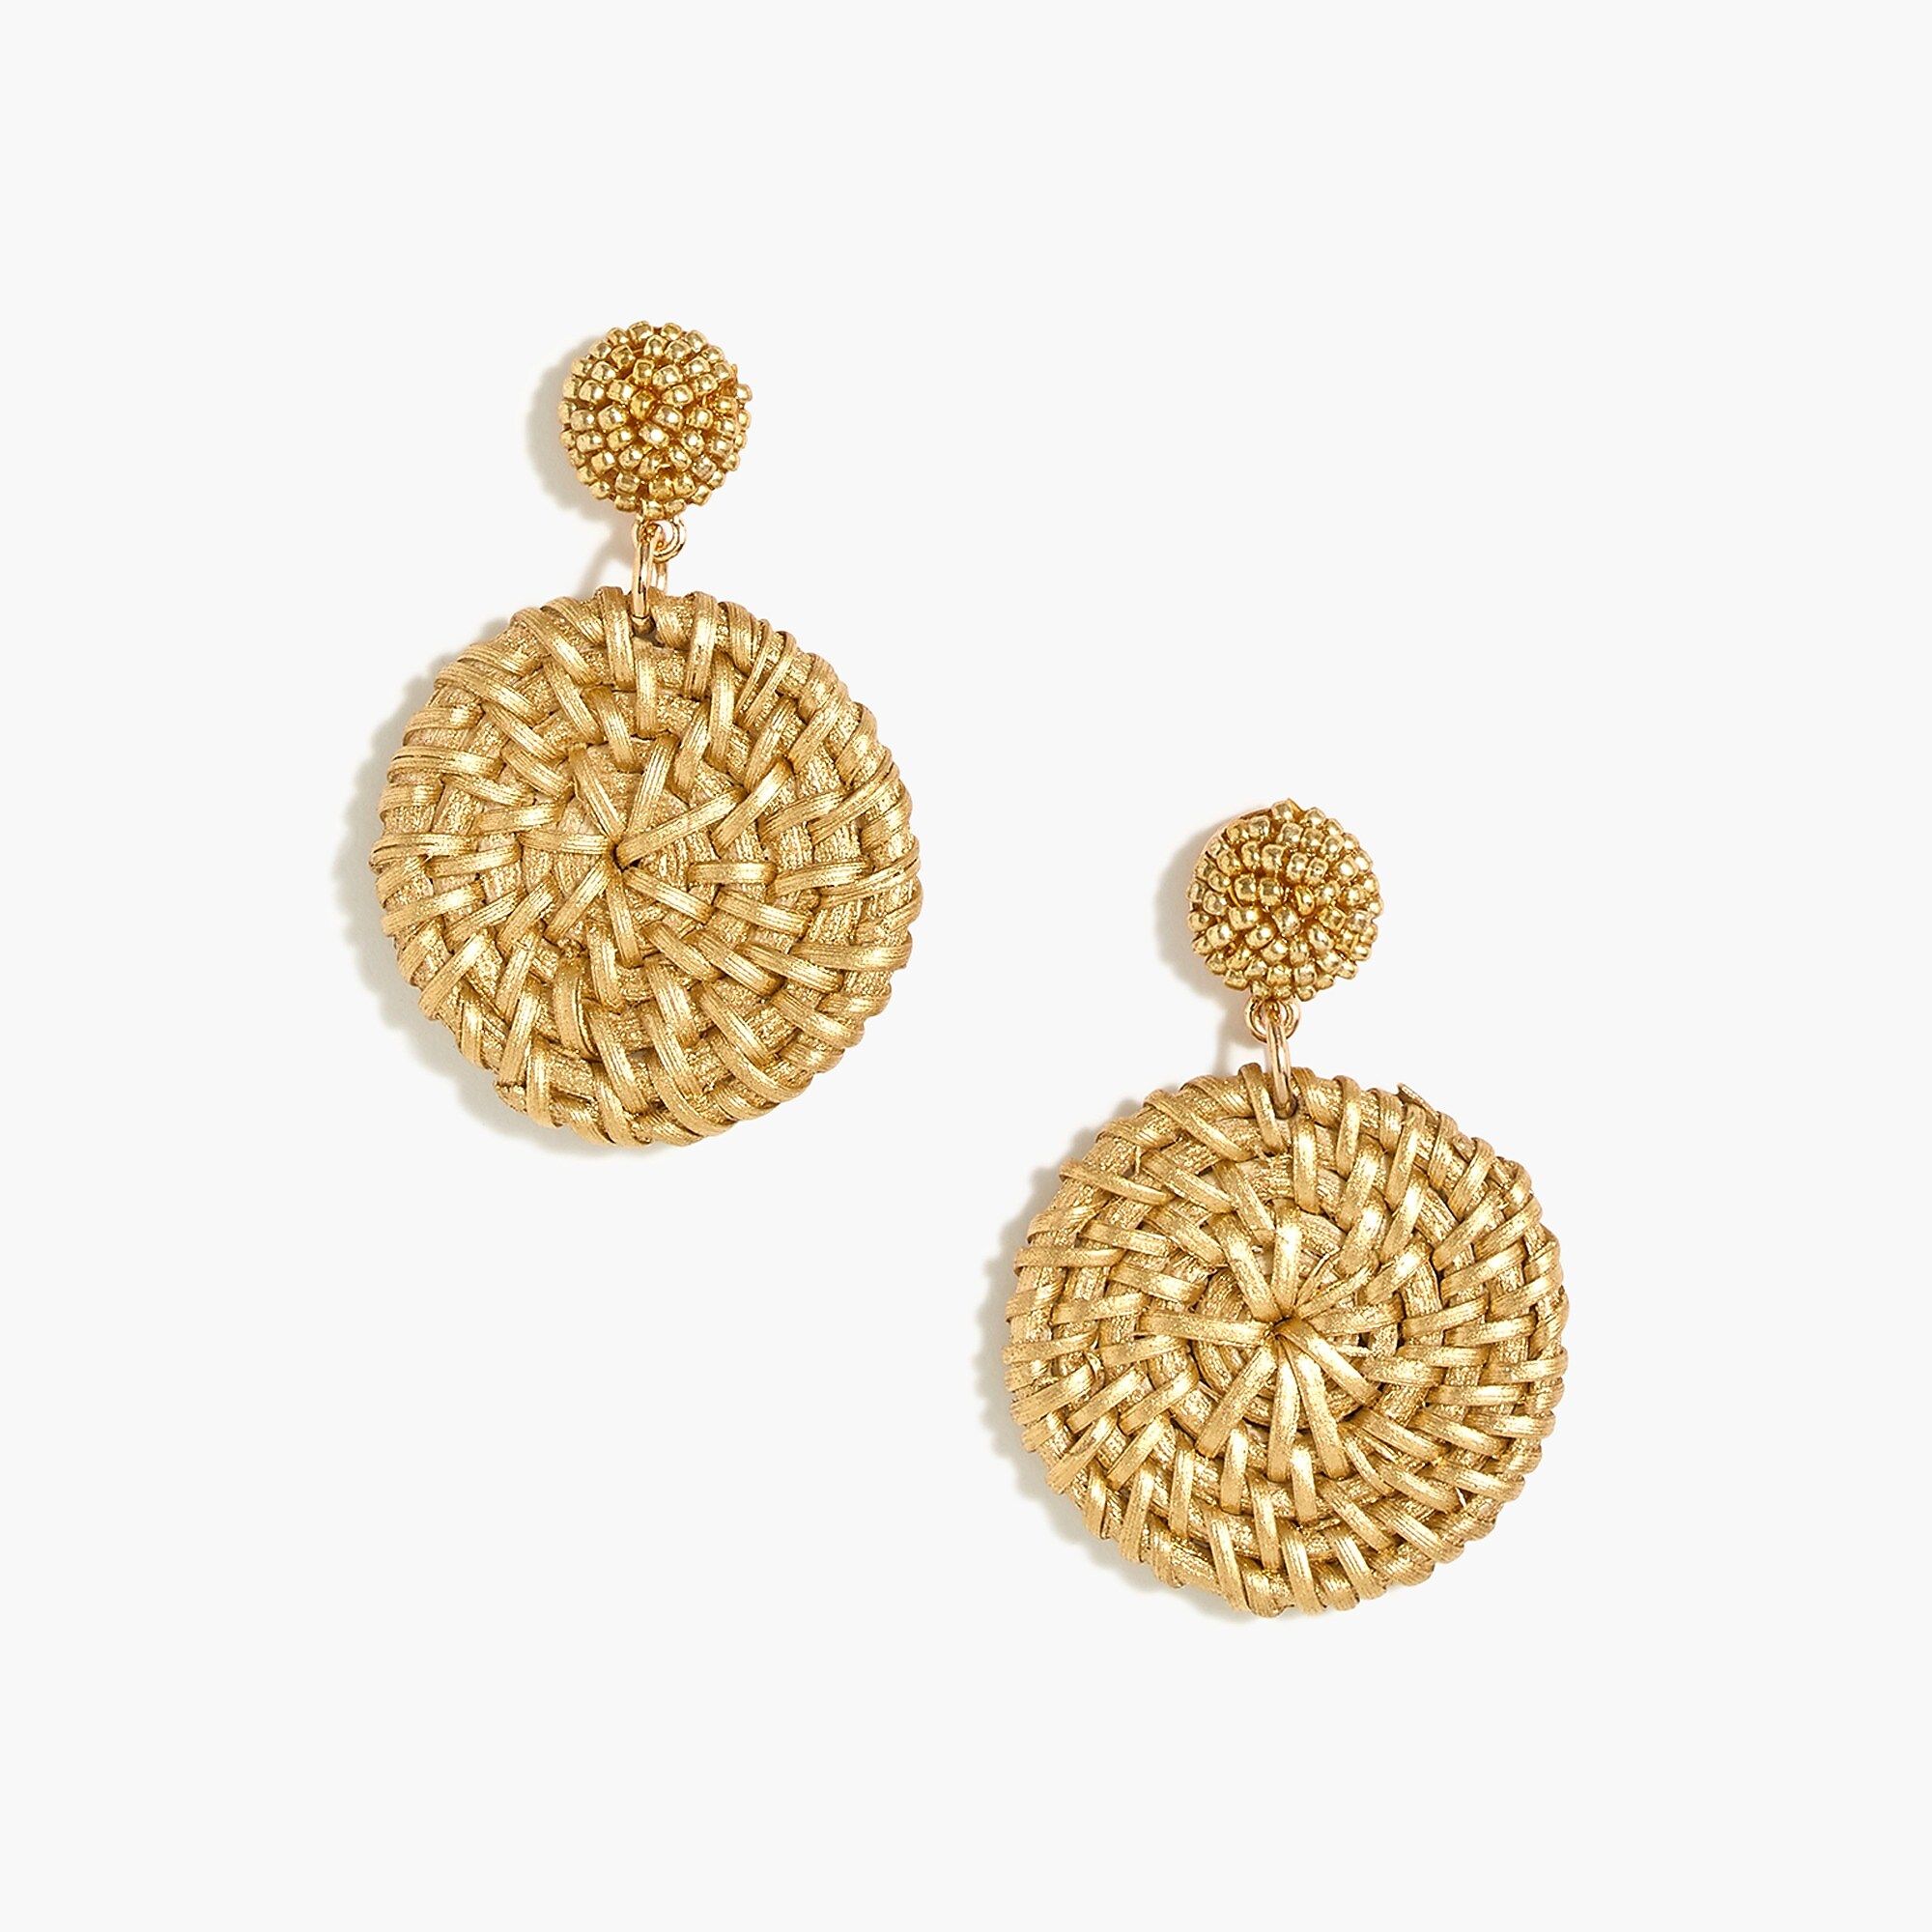 Bead and rattan statement earrings | J.Crew Factory